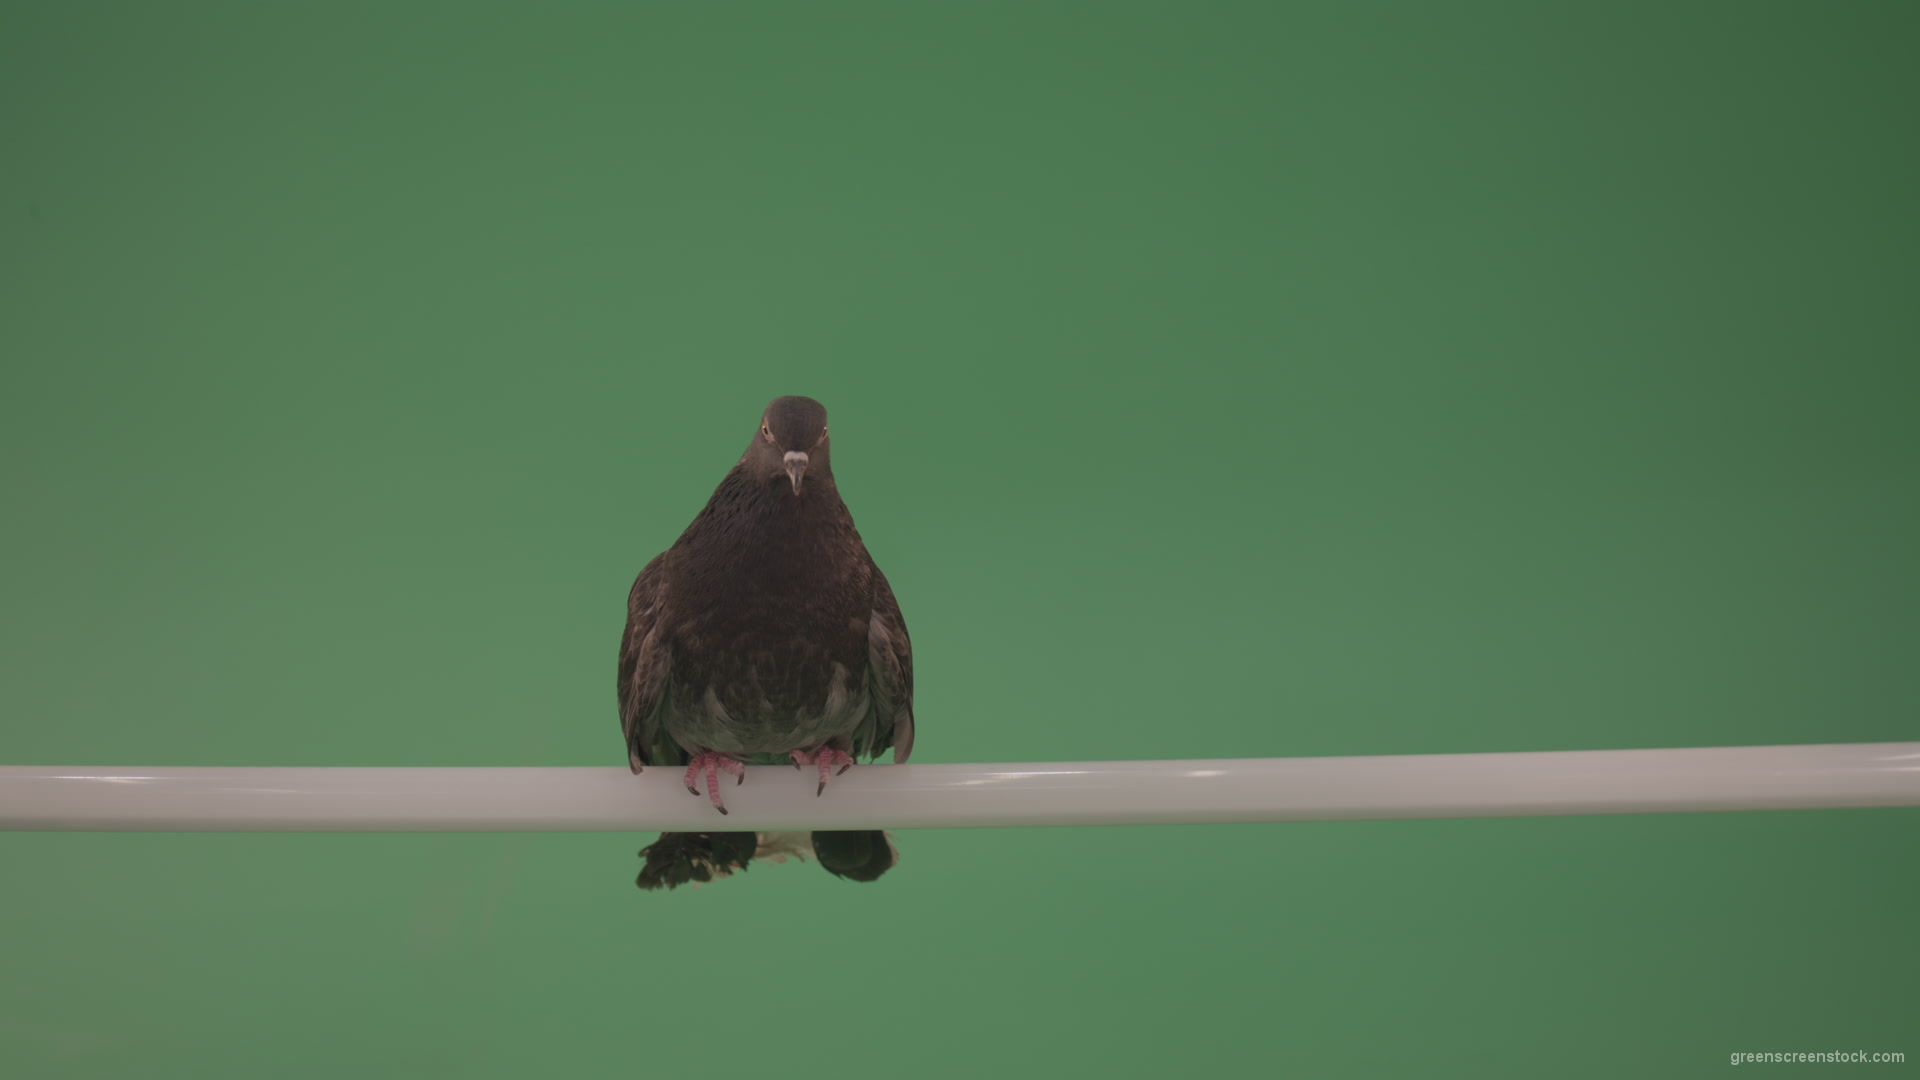 Dove-sitting-on-a-branch-in-the-city-isolated-in-green-screen-studio_005 Green Screen Stock